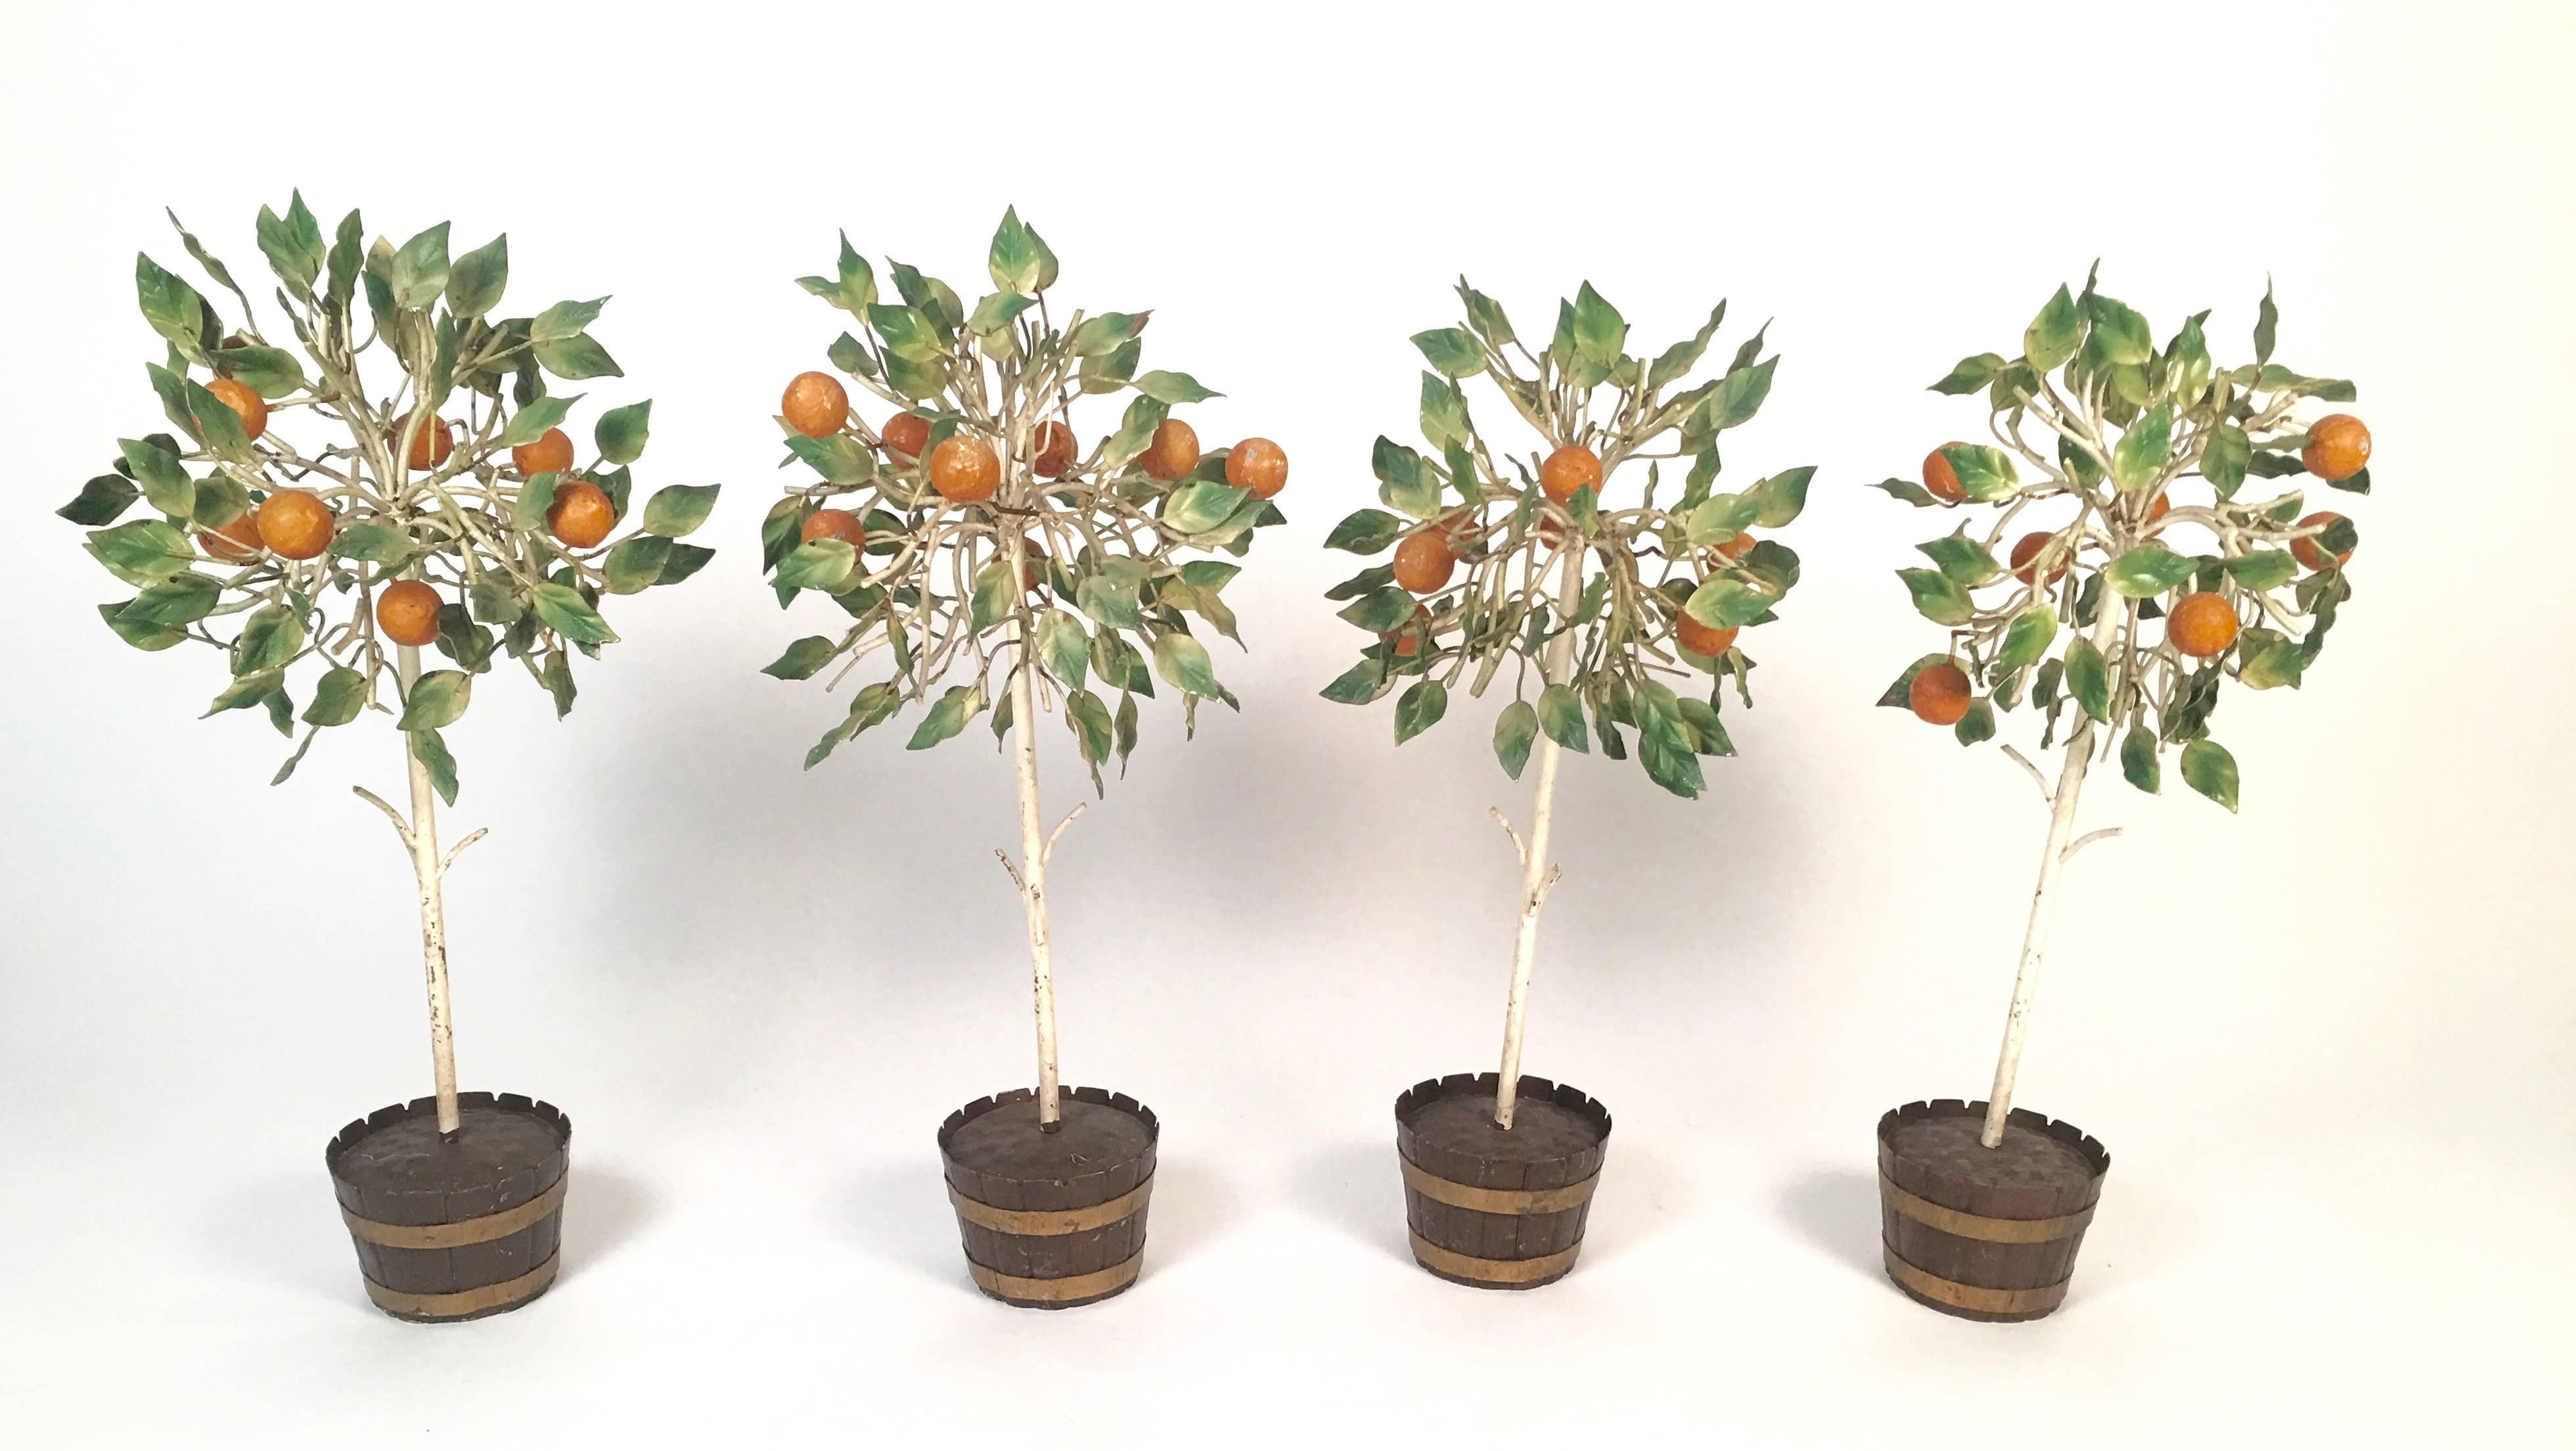 A set of four vintage decorative Italian tole orange trees, the branches in white painted metal with variegated green painted leaves in brown metal barrel-like planters with wood slats, filled with bumpy metal resembling soil. Beautiful on a mantel,